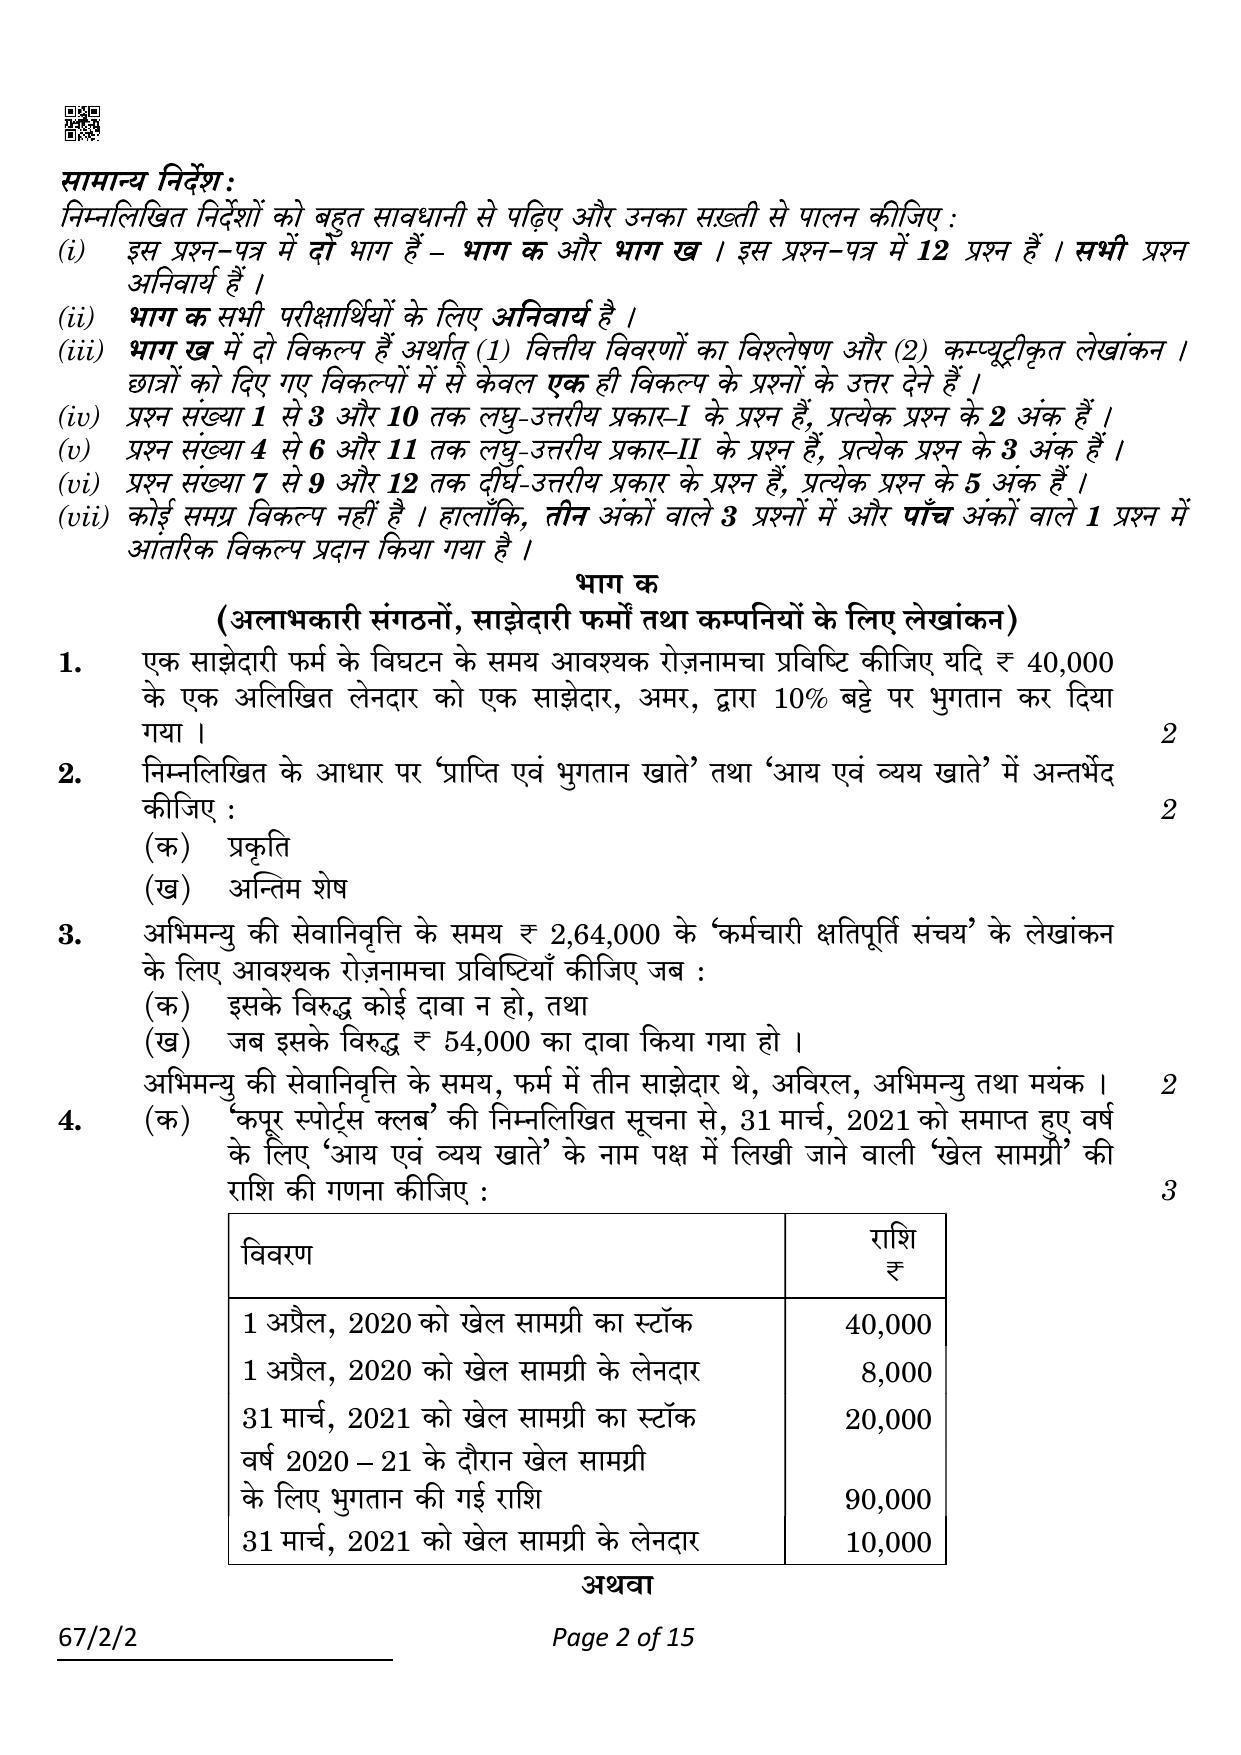 CBSE Class 12 67-2-2 Accountancy 2022 Question Paper - Page 2